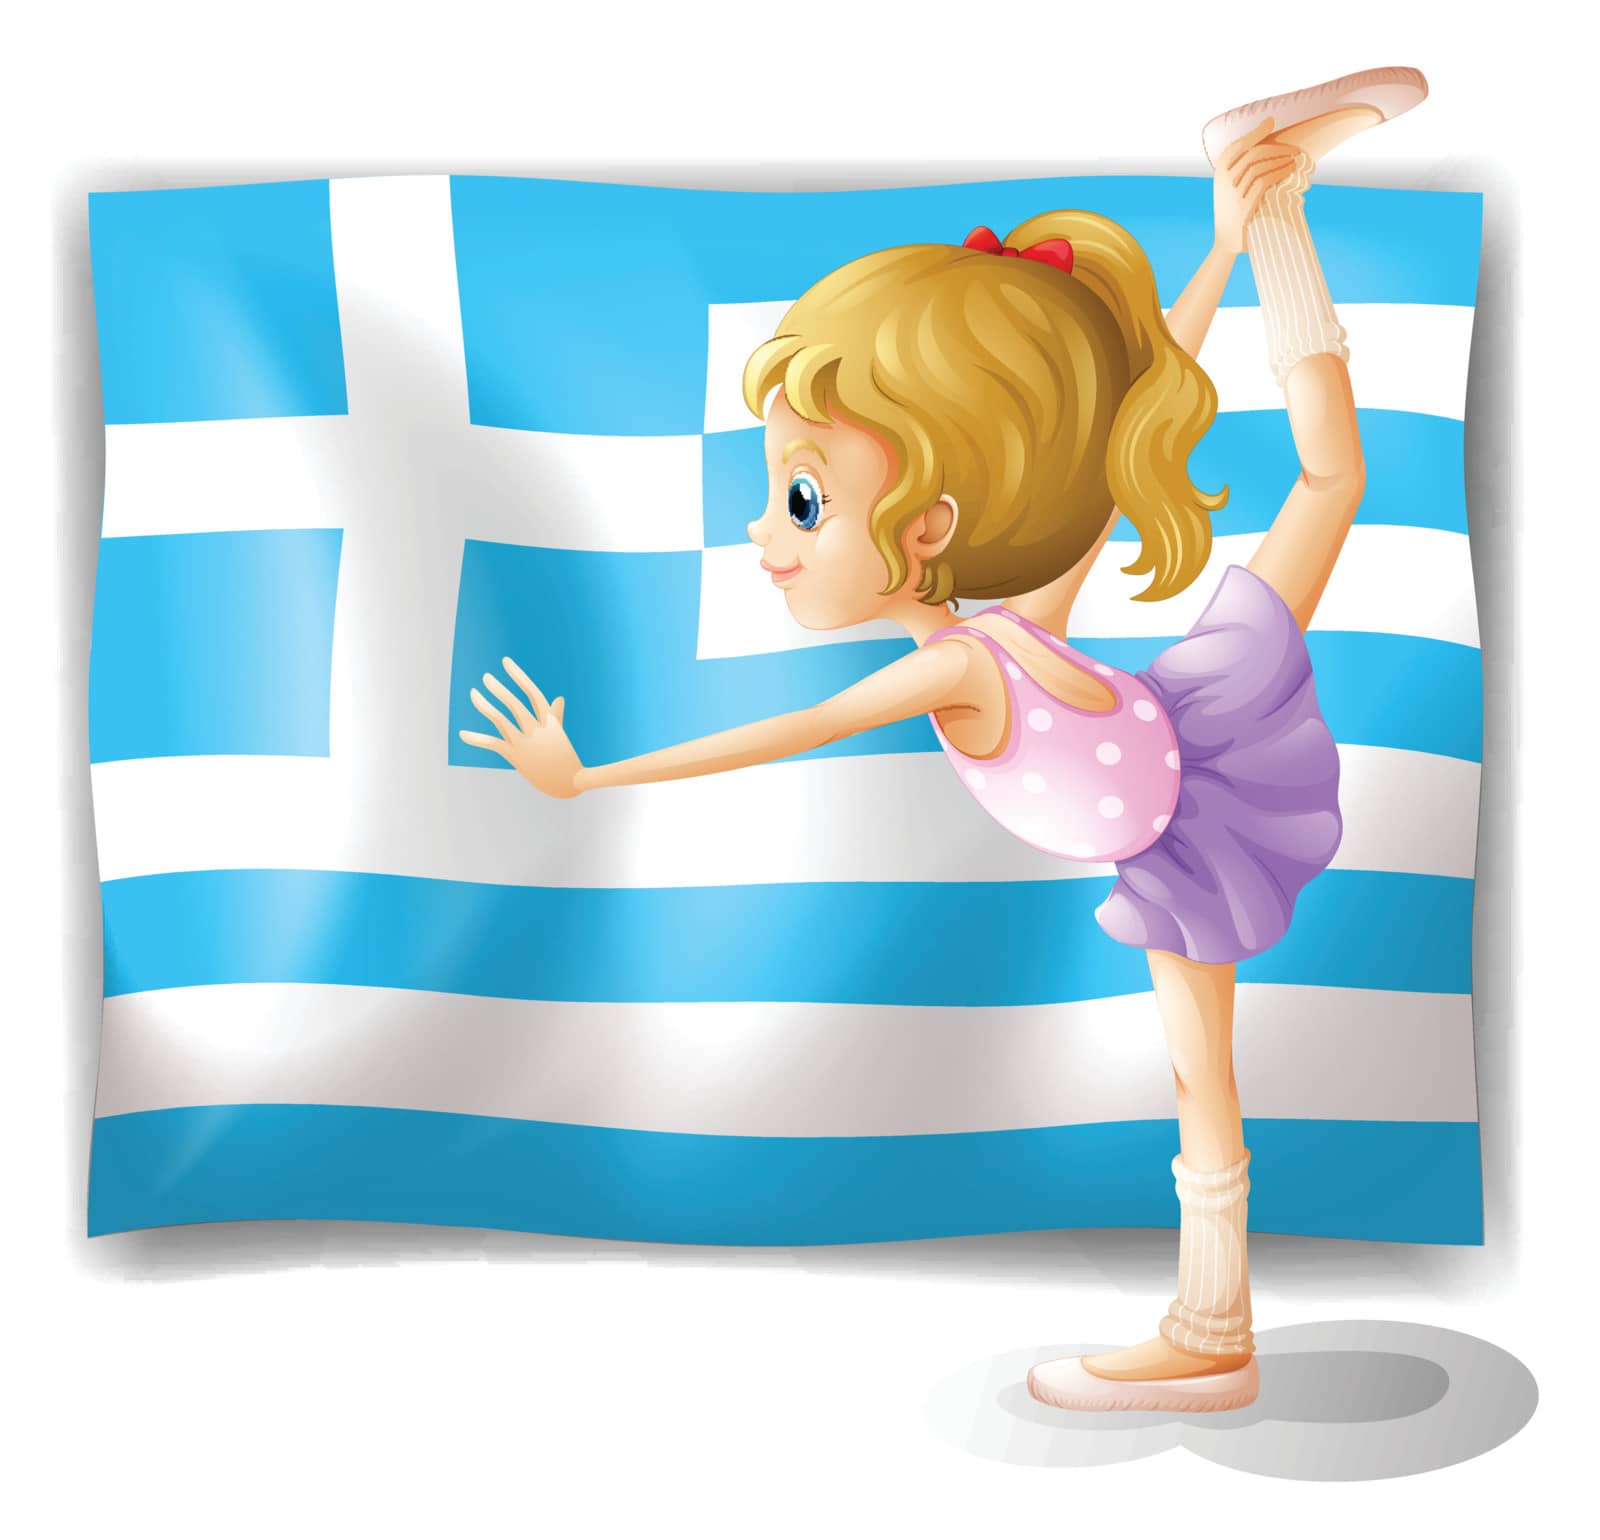 Illustration of the flag of Greece with a ballet dancer on a white background